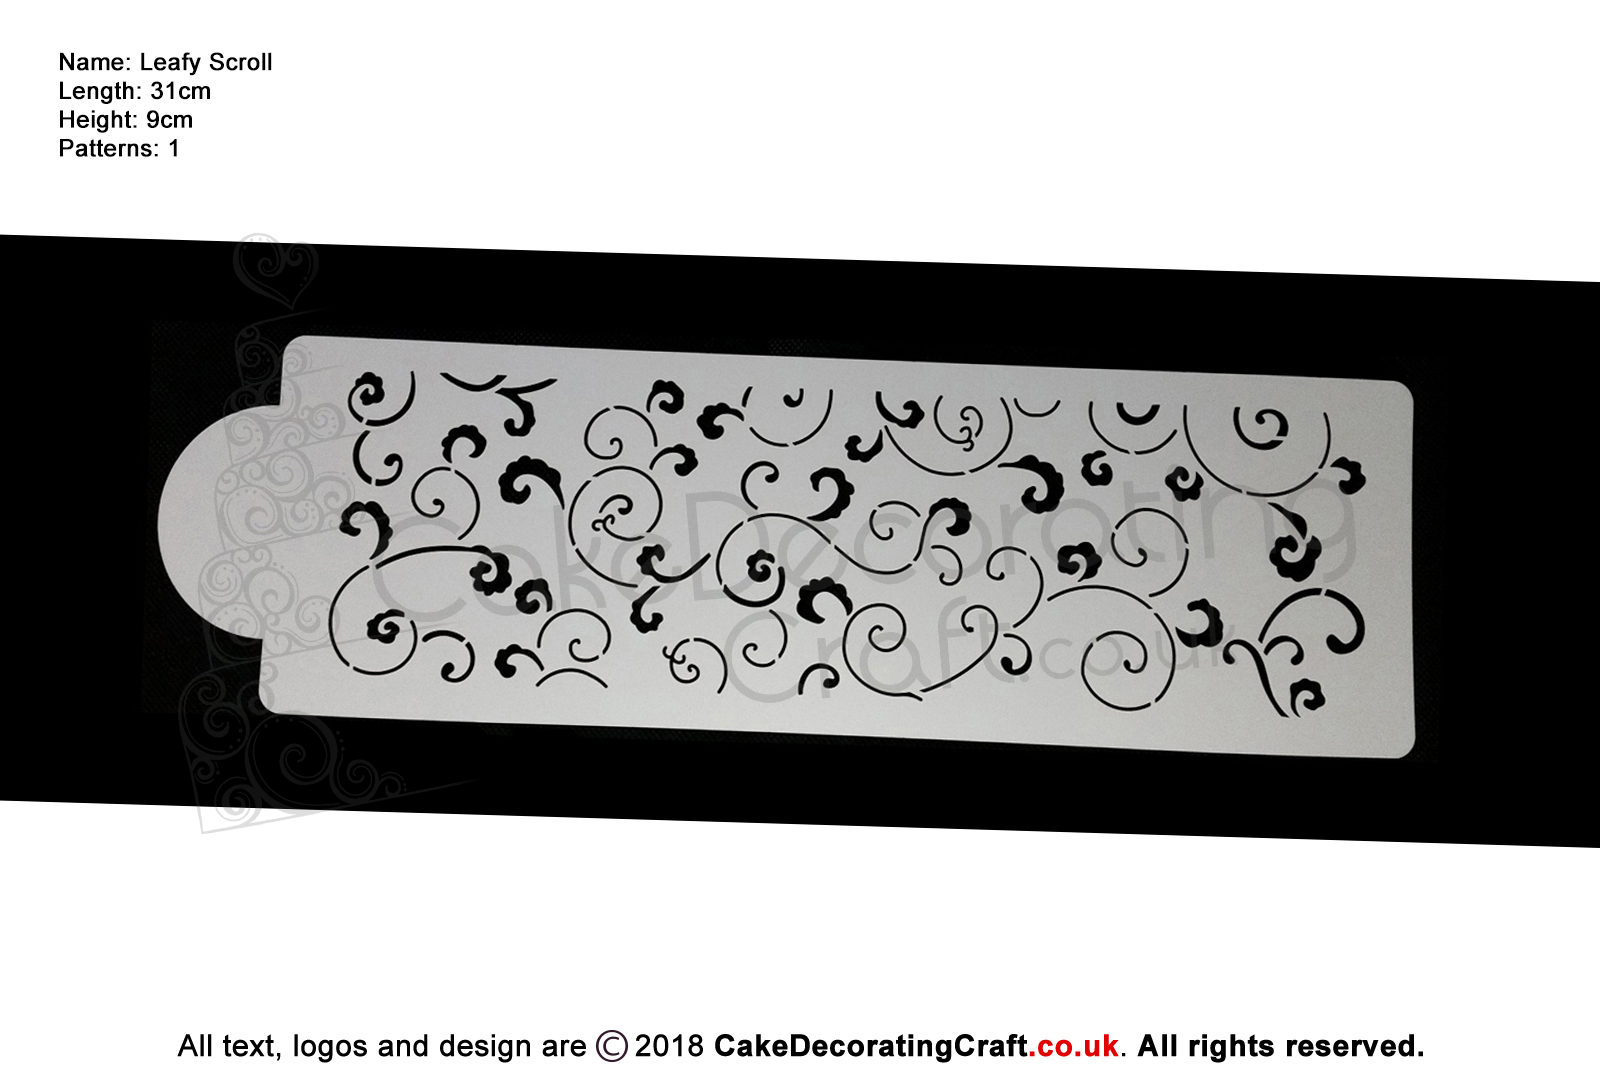 Leafy Scroll Stencil |  Air Brush Stenciling | Cake and Cupcake Decorating Craft Tool